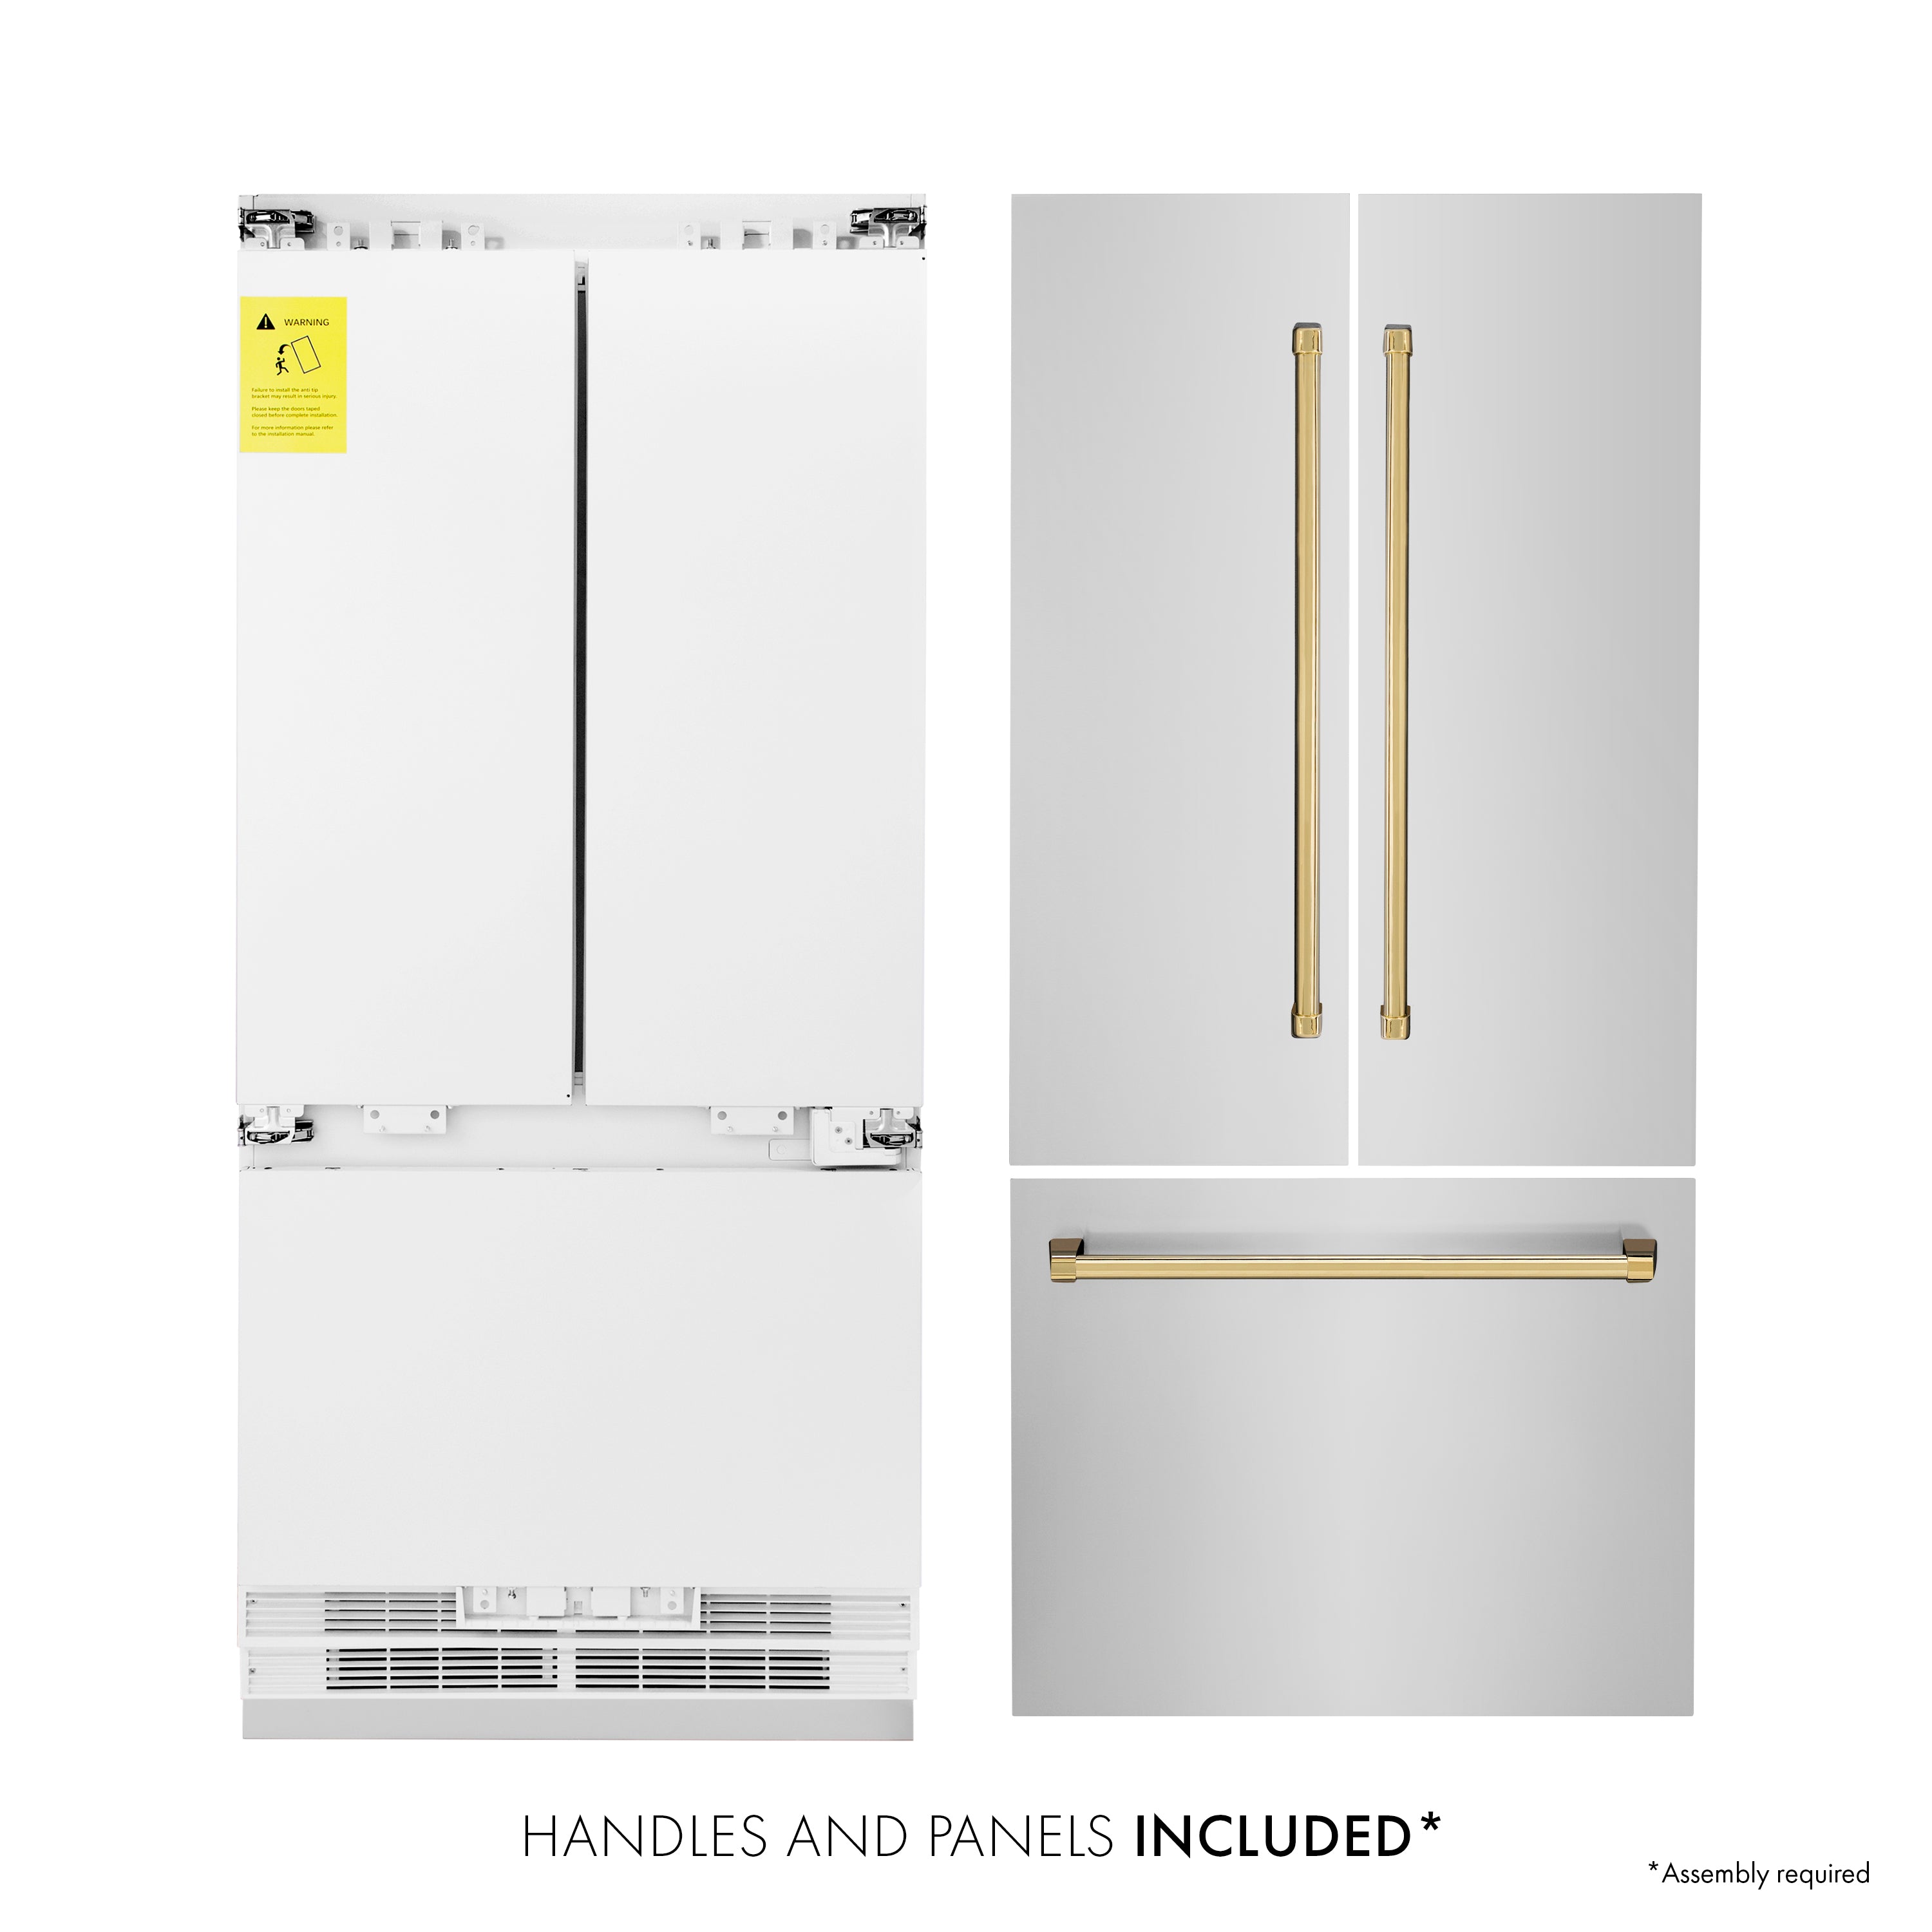 ZLINE 36” Autograph Edition 19.6 cu. ft. Built-in 3-Door French Door Refrigerator with Internal Water and Ice Dispenser in Stainless Steel with Polished Gold Accents